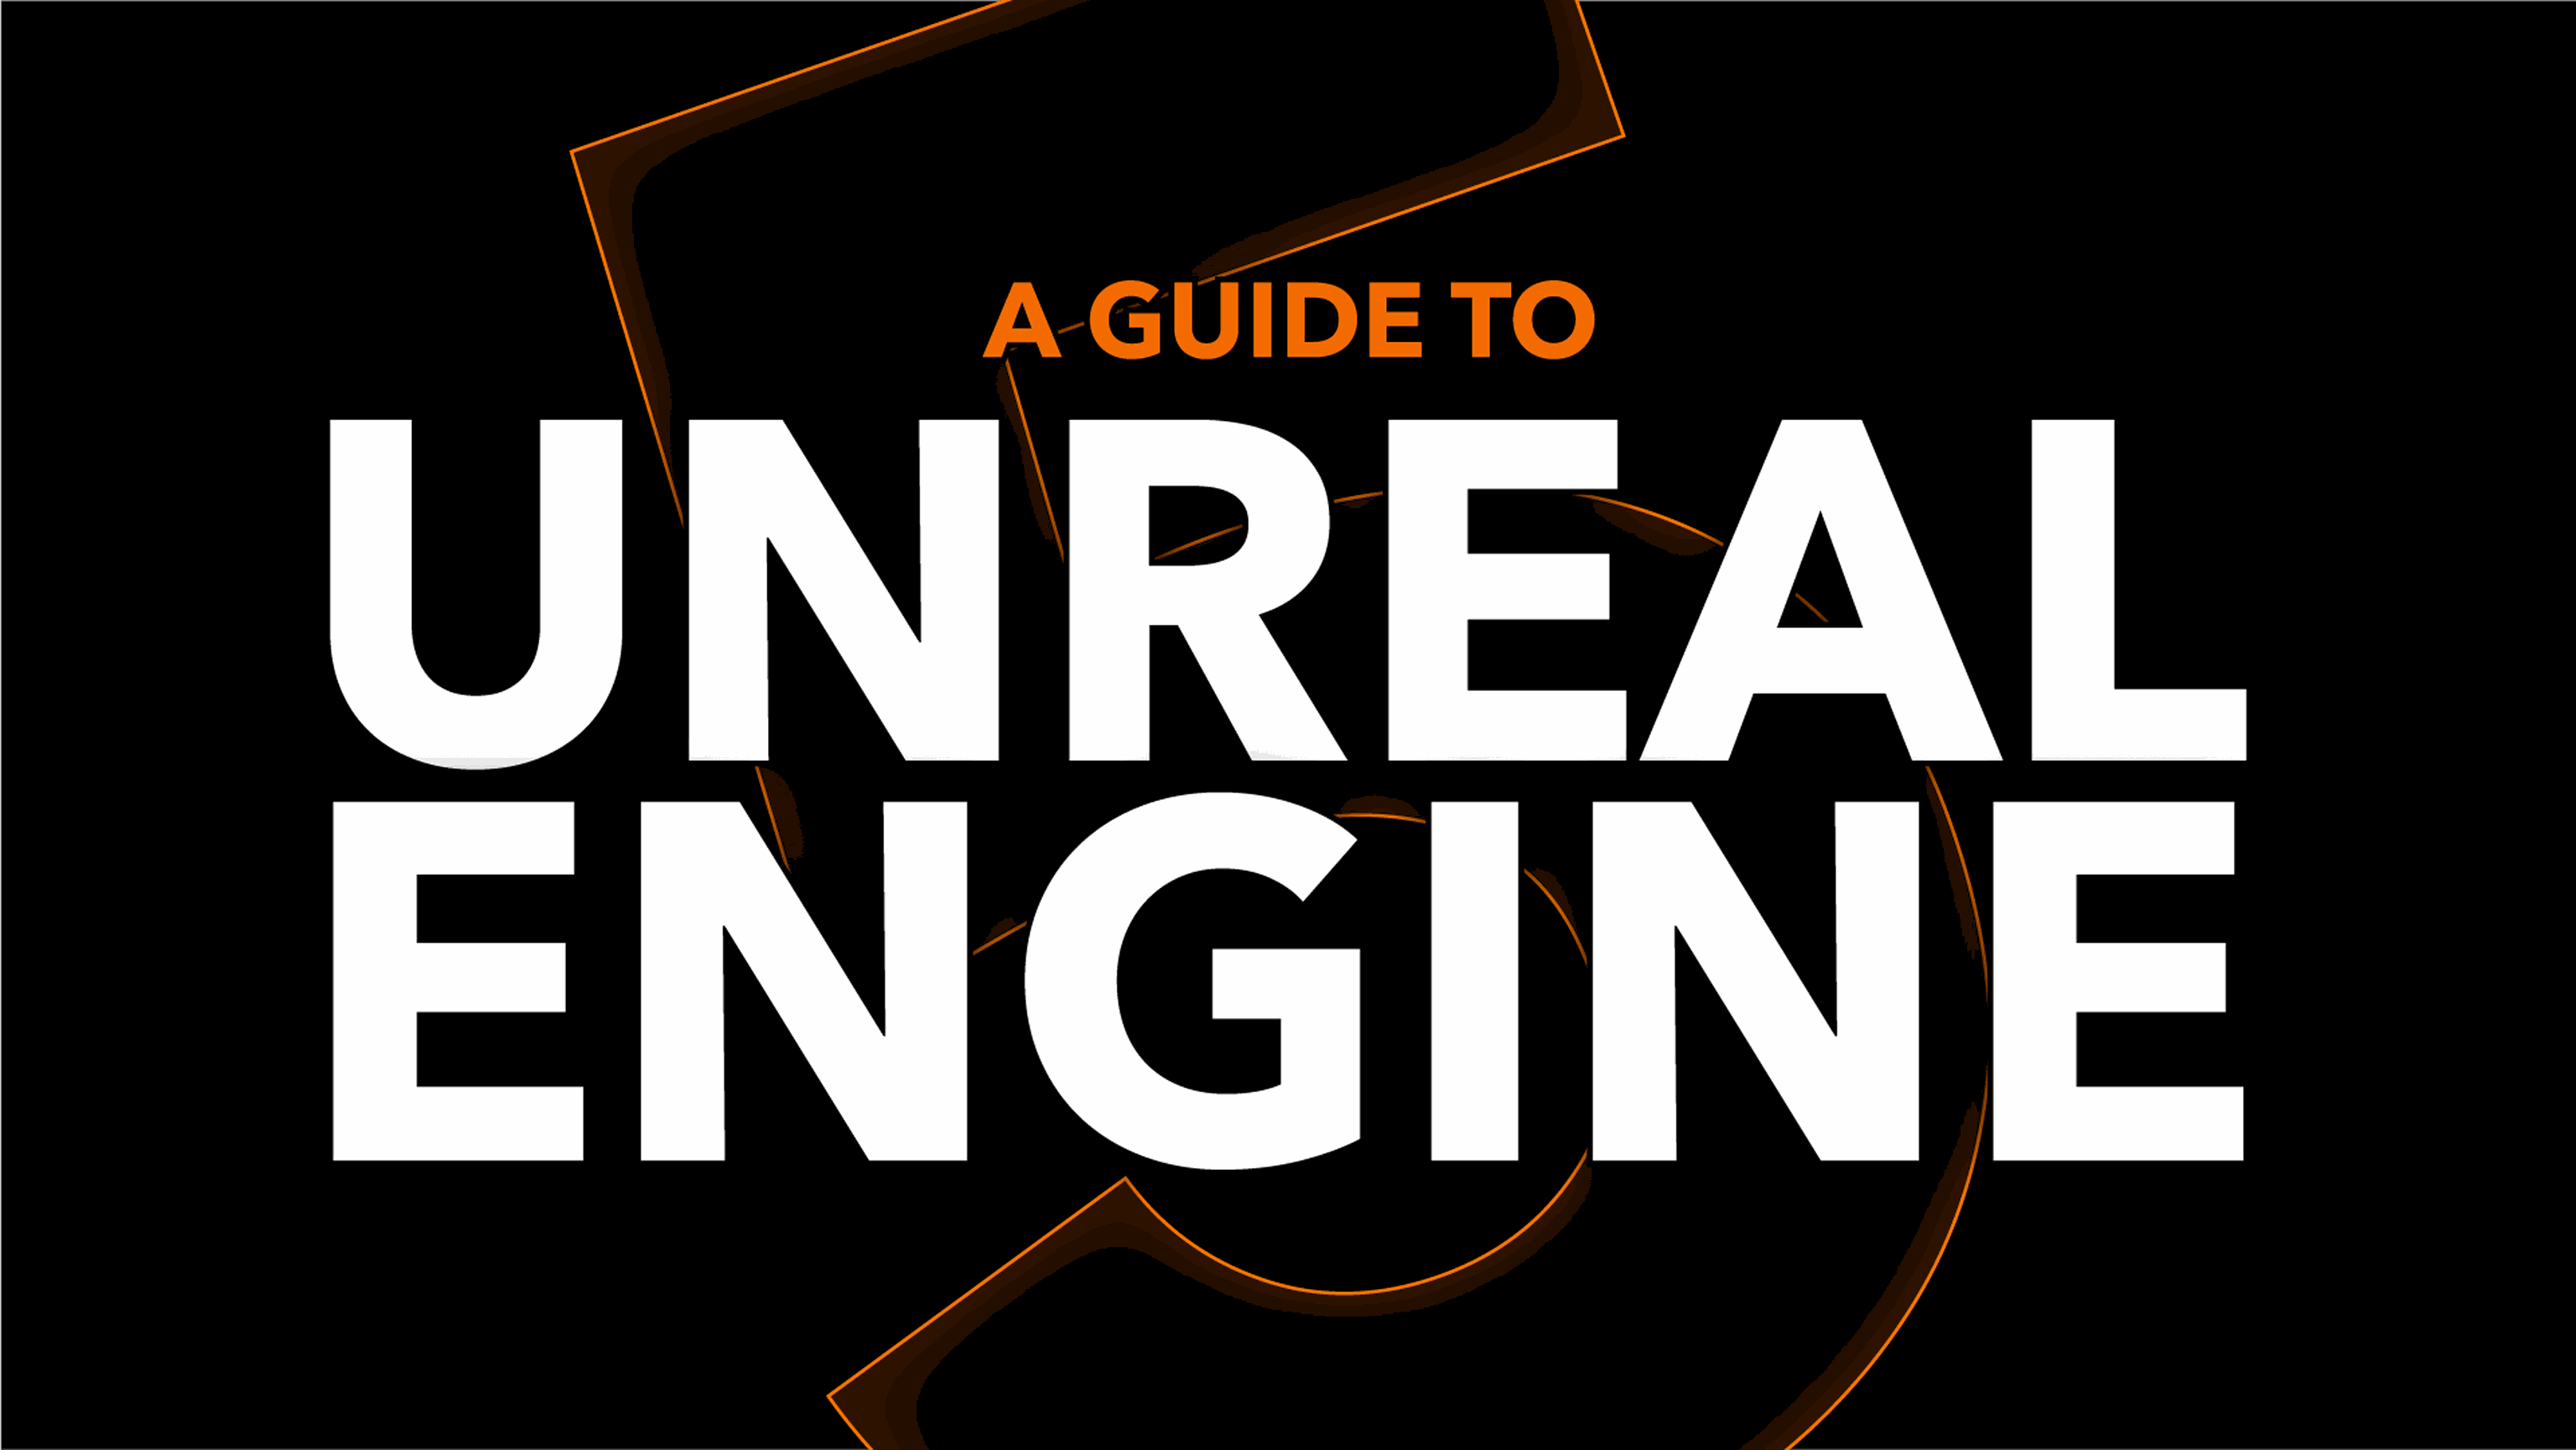 A guide to Unreal Engine written on a black background with a large orange 5